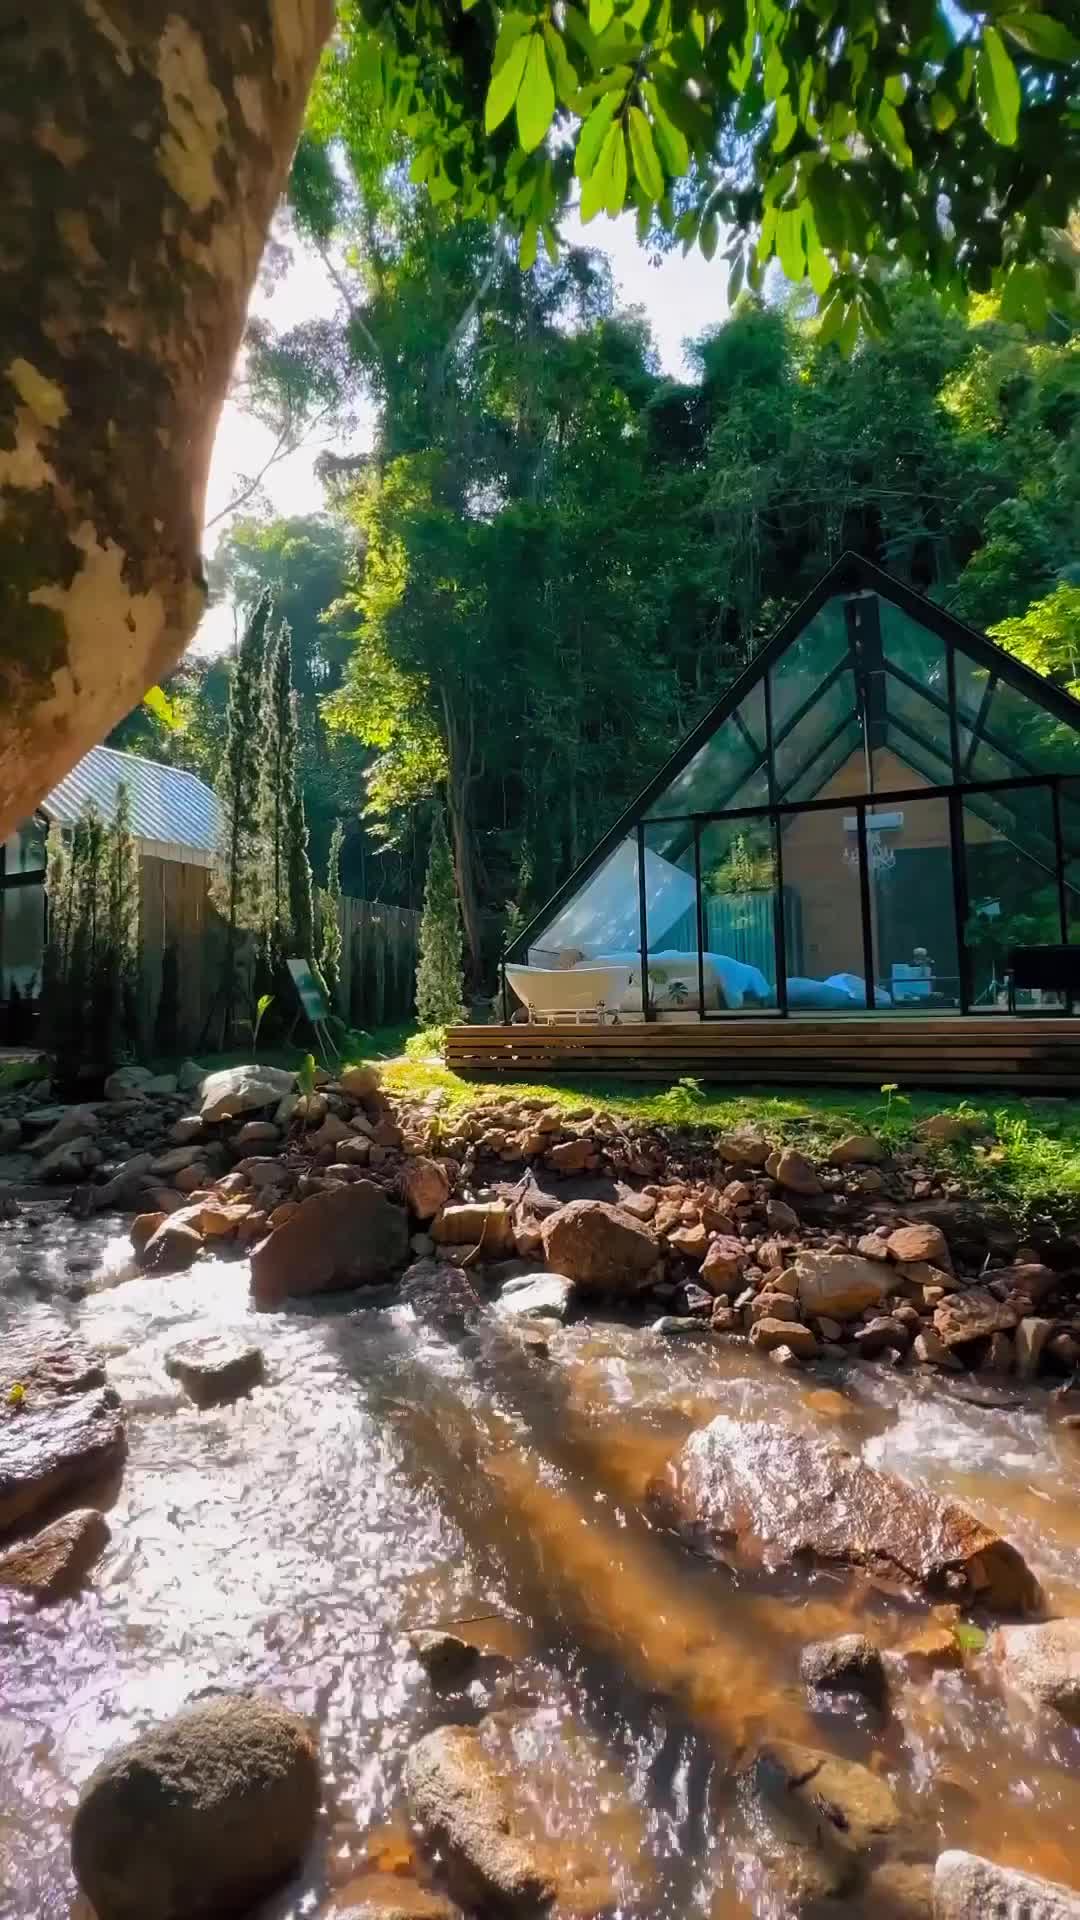 Imagine waking up in this beautiful glamping site. 🙂🍃 📍 @norden_glamping , Chiang Mai 

.
.
.
.
.
.
.
.
.
.
.
.
.
.
.
#cozyvibes #cabinlife #cozyroom #cabininthewoods #cabinlove #cozyhome #cozyvibes #glamping #cnx #lostinthailand #slowlifestyle #chillvibes #naturelovers  #slowlivingforlife #chiangmai #chiangmaitrip #explorechiangmai #adayinchiangmai #adayinthailand 
#reviewchiangmai  #igthailand #travelthailand #thailand #beautifulthailand #amazingthailand #explorethailand #เชียงใหม่ #รีวิวเชียงใหม่ #แม่กำปอง